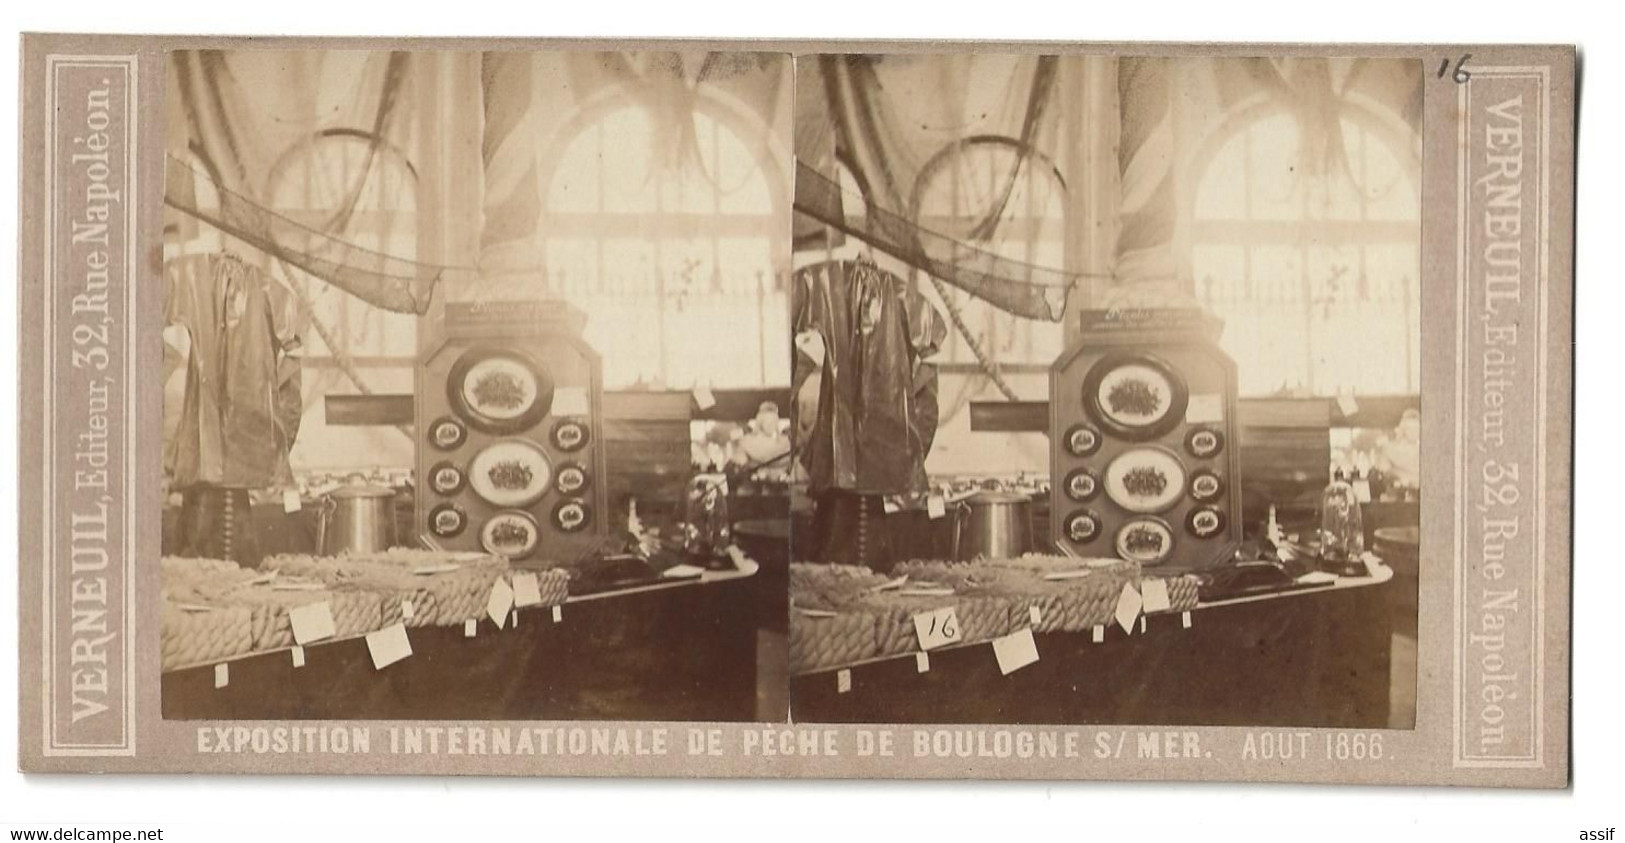 1866 BOULOGNE SUR MER EXPOSITION INTERNATIONALE DE PECHE PHOTO STEREO AUGUSTE VERNEUIL N°16 /FREE SHIPPING REGISTERED - Stereoscopio